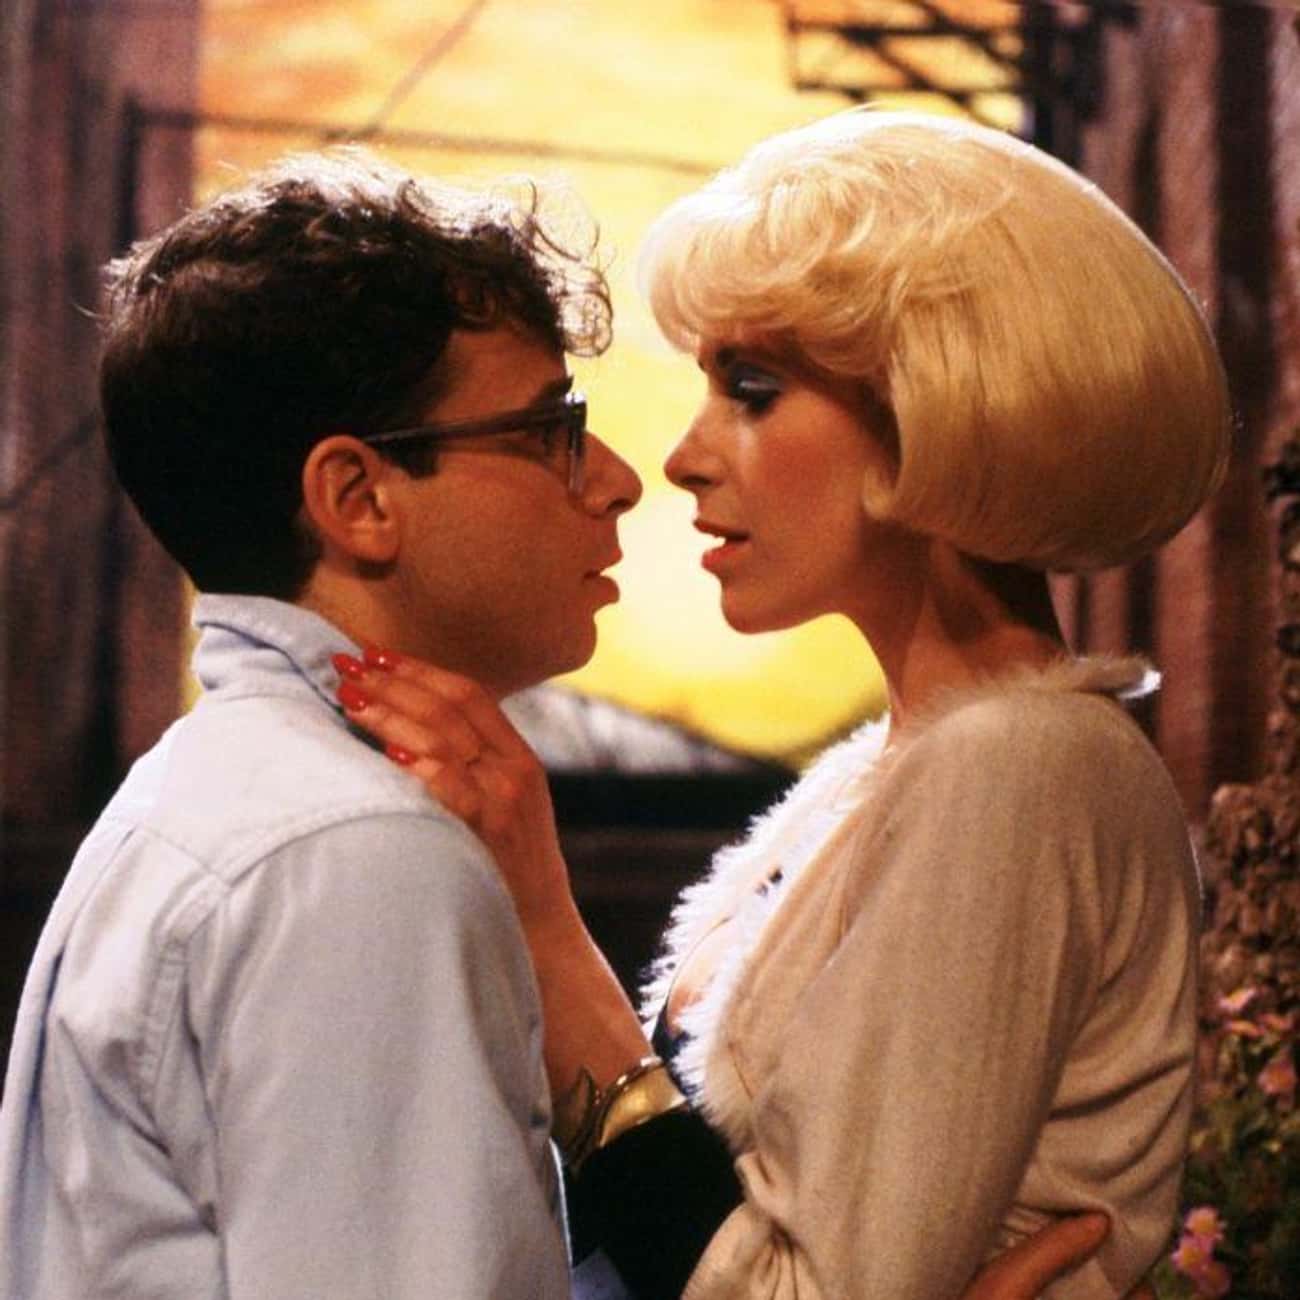 Seymour and Audrey - 'Little Shop of Horrors'